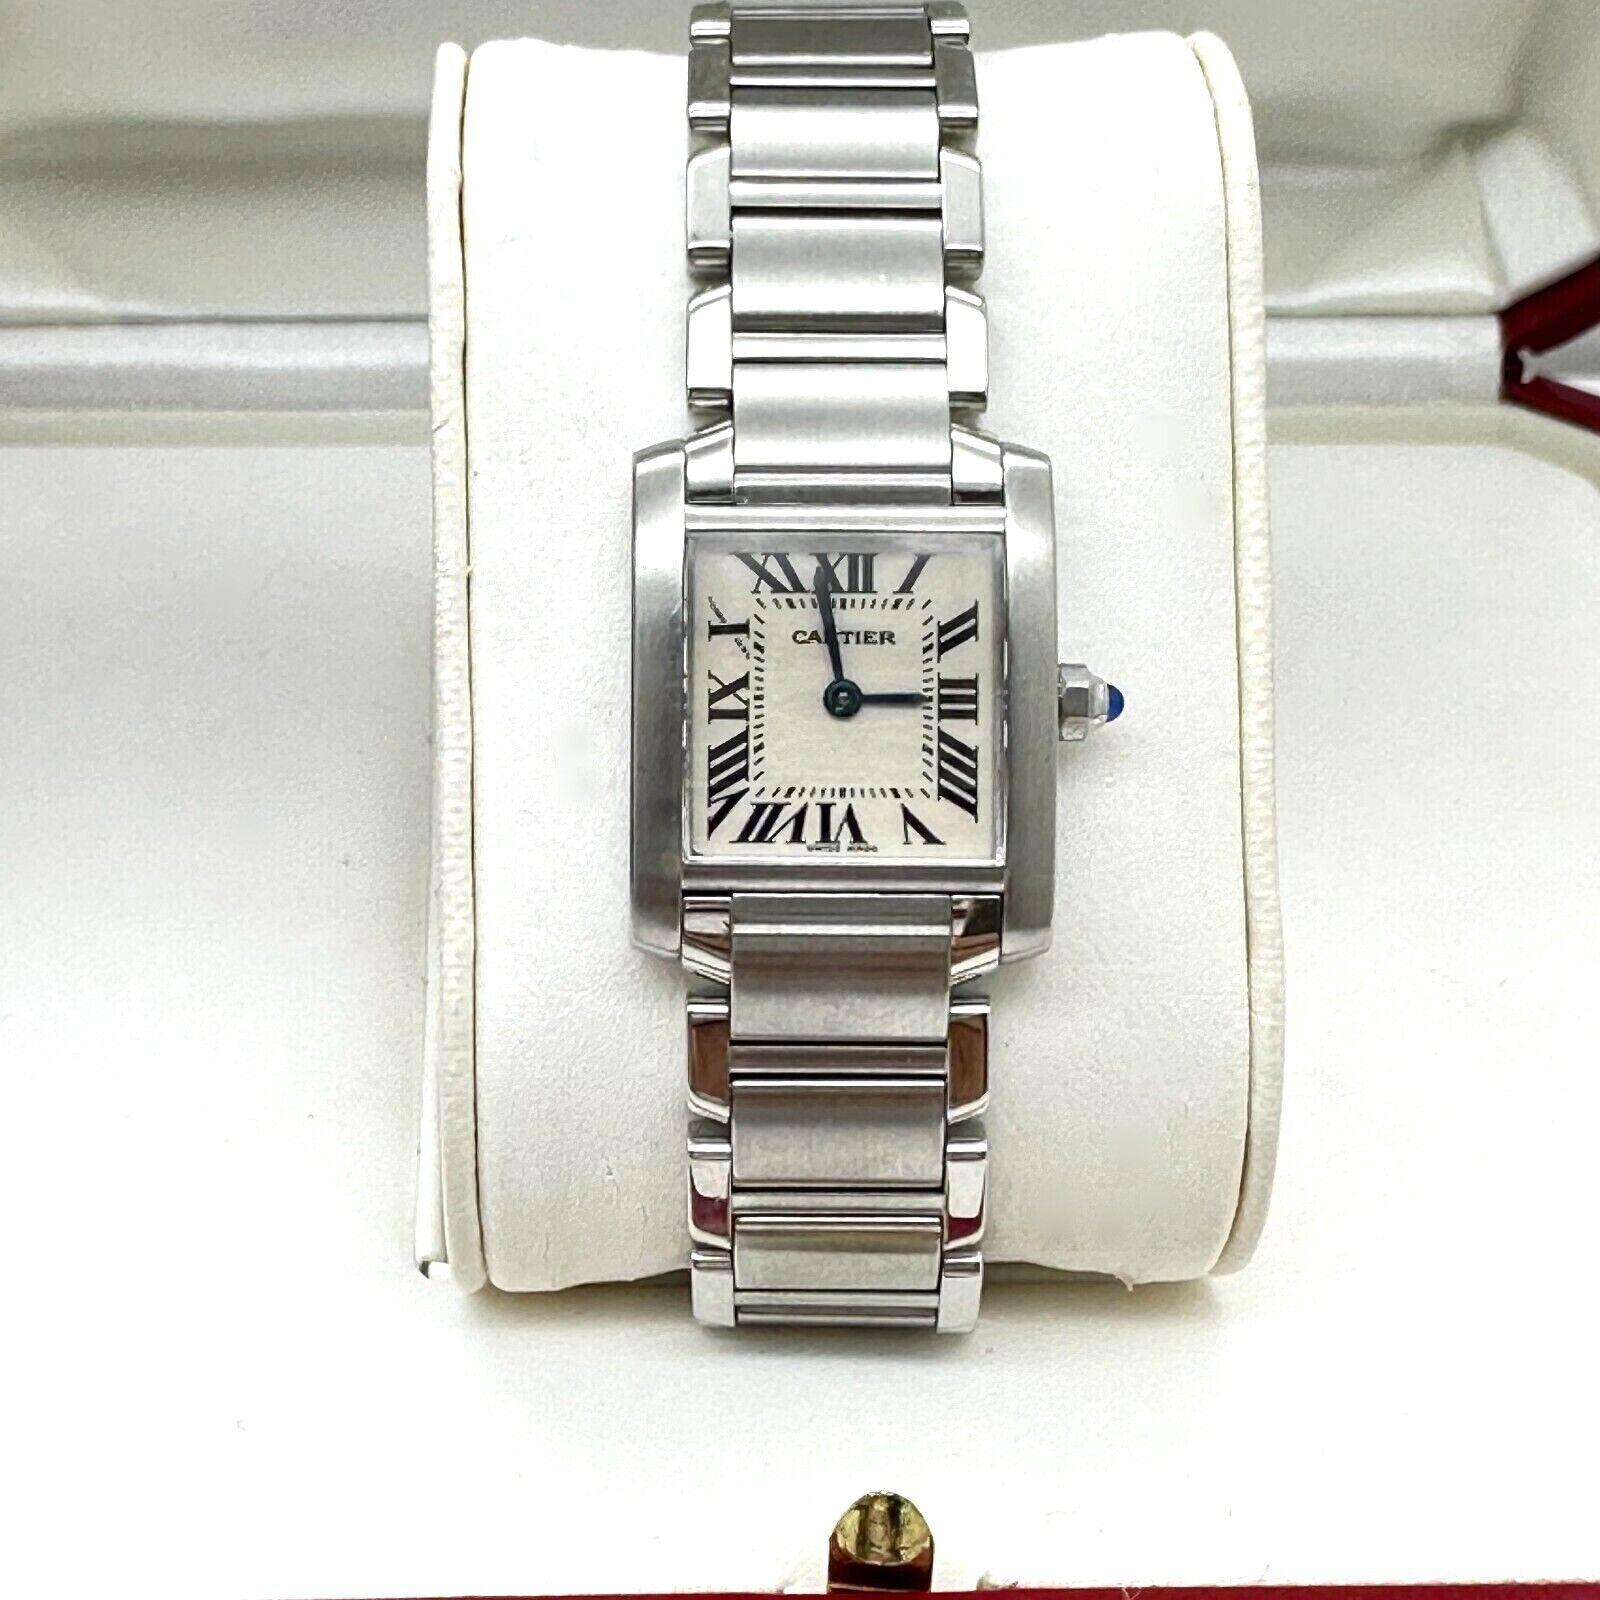 Style Number: 2384

Year: 2001

Model: Tank Francaise

Case Material: Stainless Steel

Band: Stainless Steel

Bezel:  Stainless Steel

Face: Sapphire Crystal 

Case Size: 20mm

Includes: 

-Cartier Box & Paper

-Certified Appraisal 

-1 Year